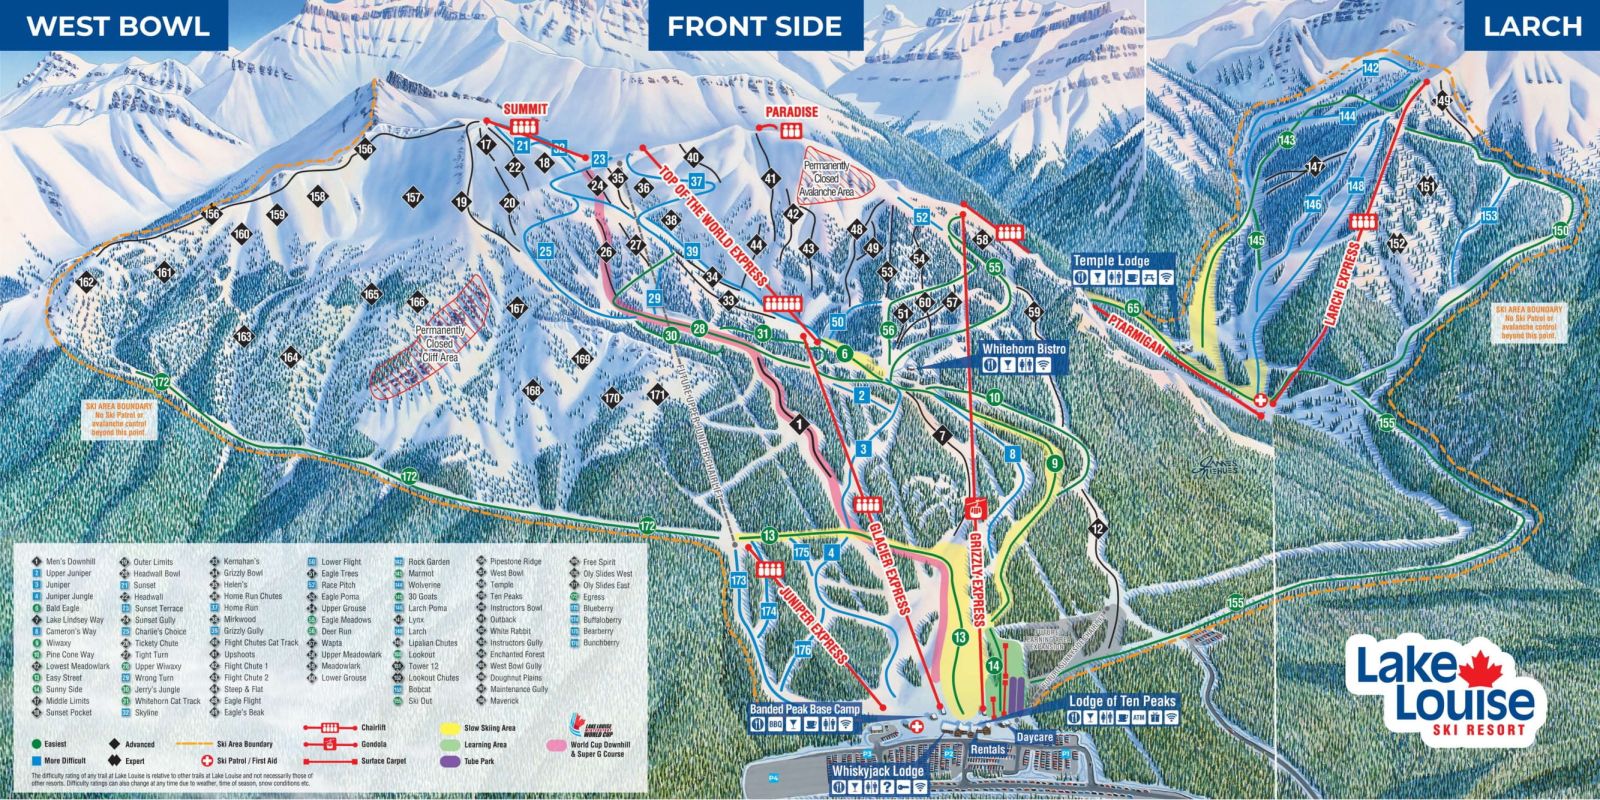 banff lake louise trail map front side